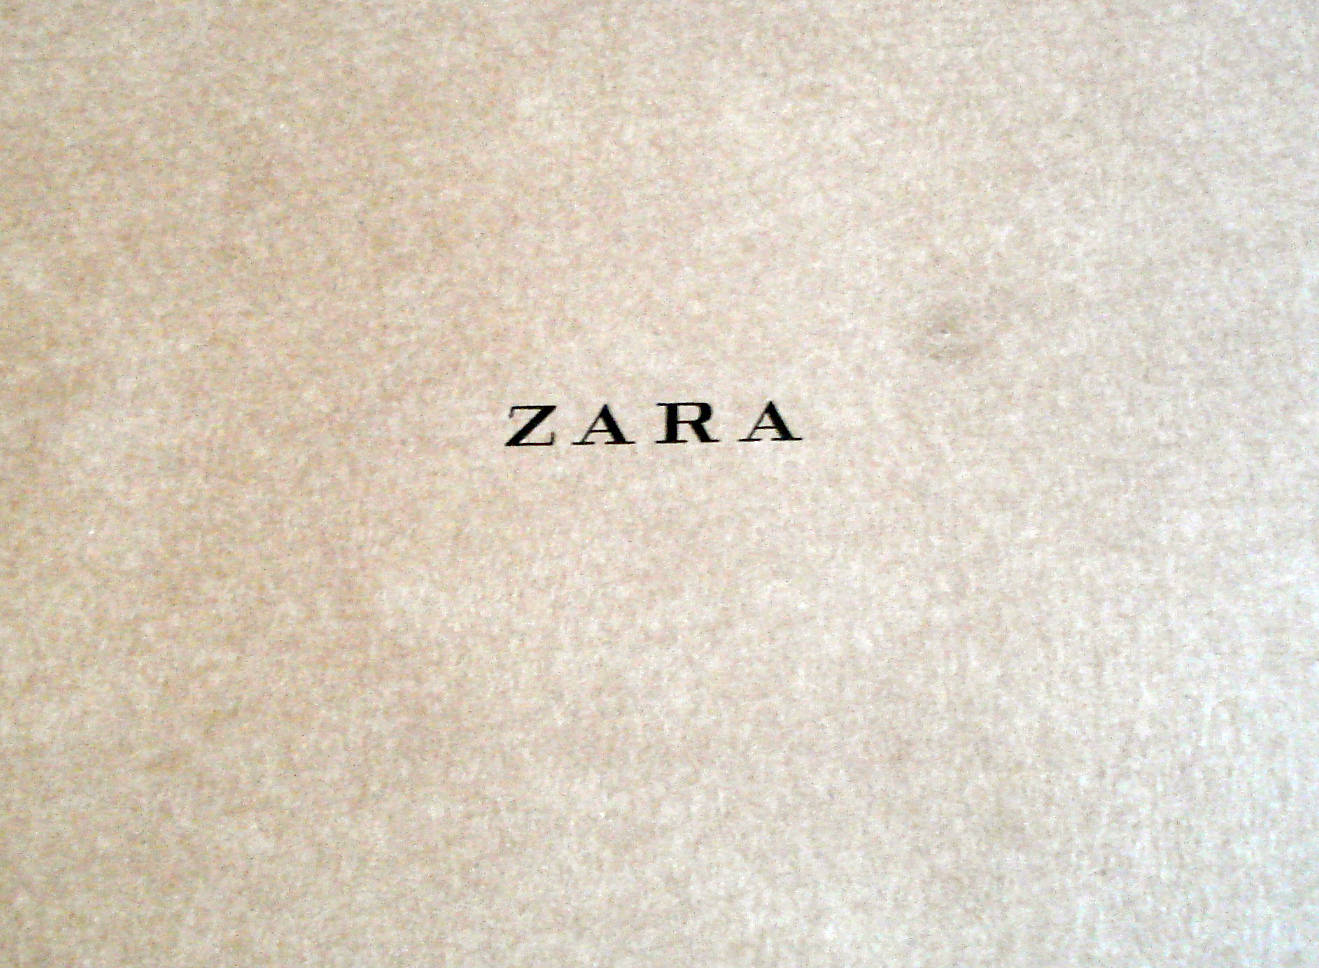 Zara's Fashionable Women's Outfit Collection Background